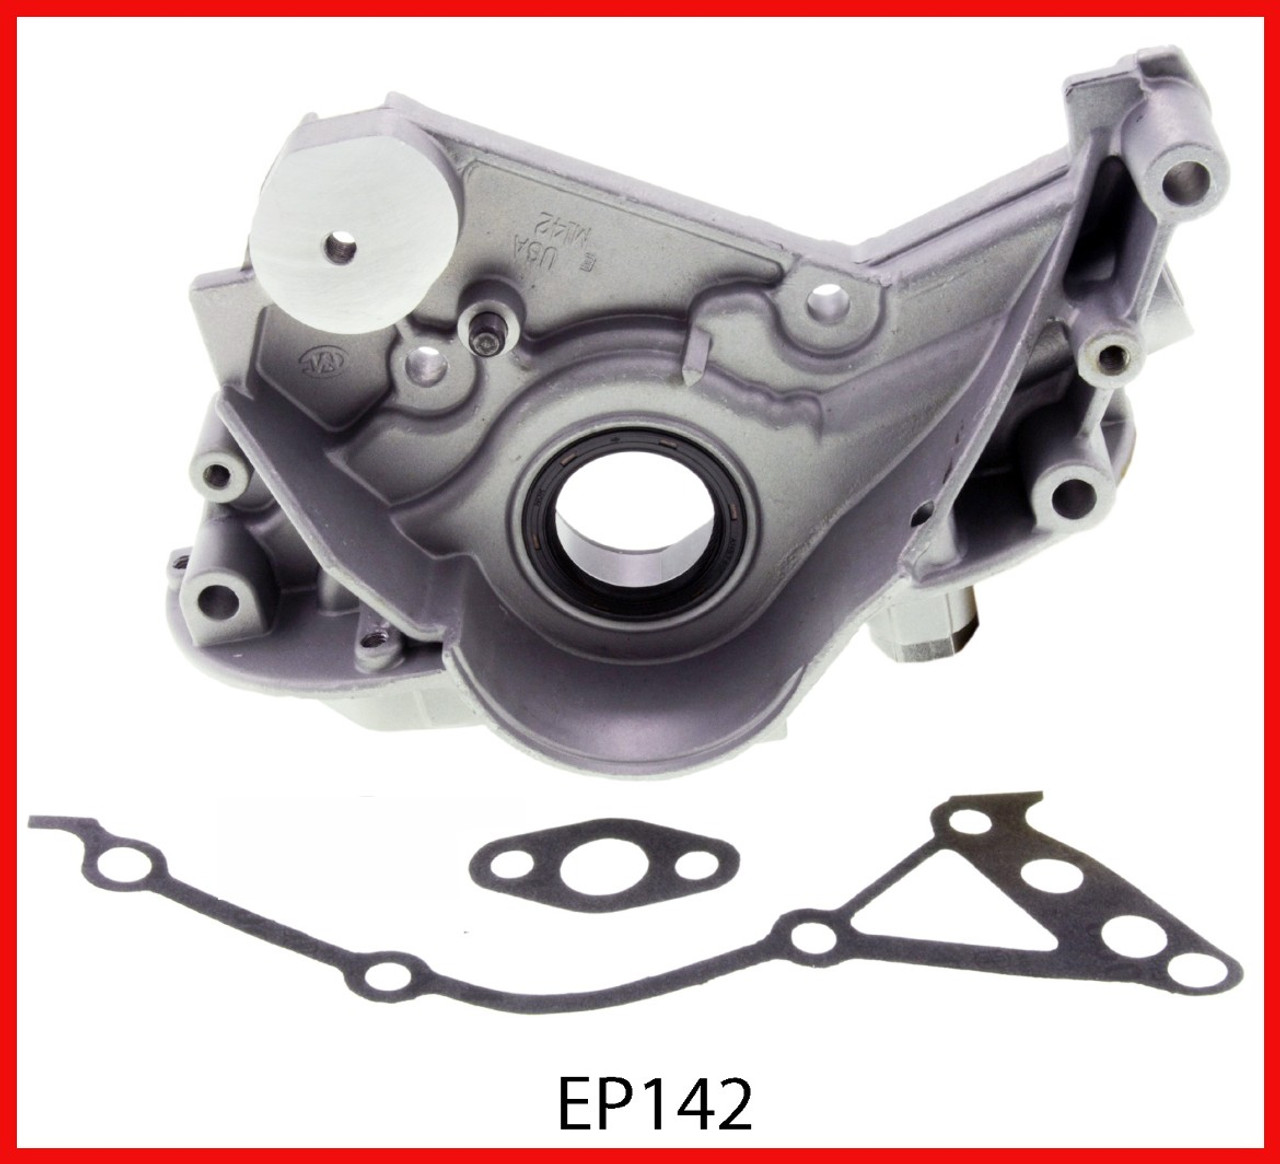 1996 Plymouth Grand Voyager 3.0L Engine Oil Pump EP142 -79